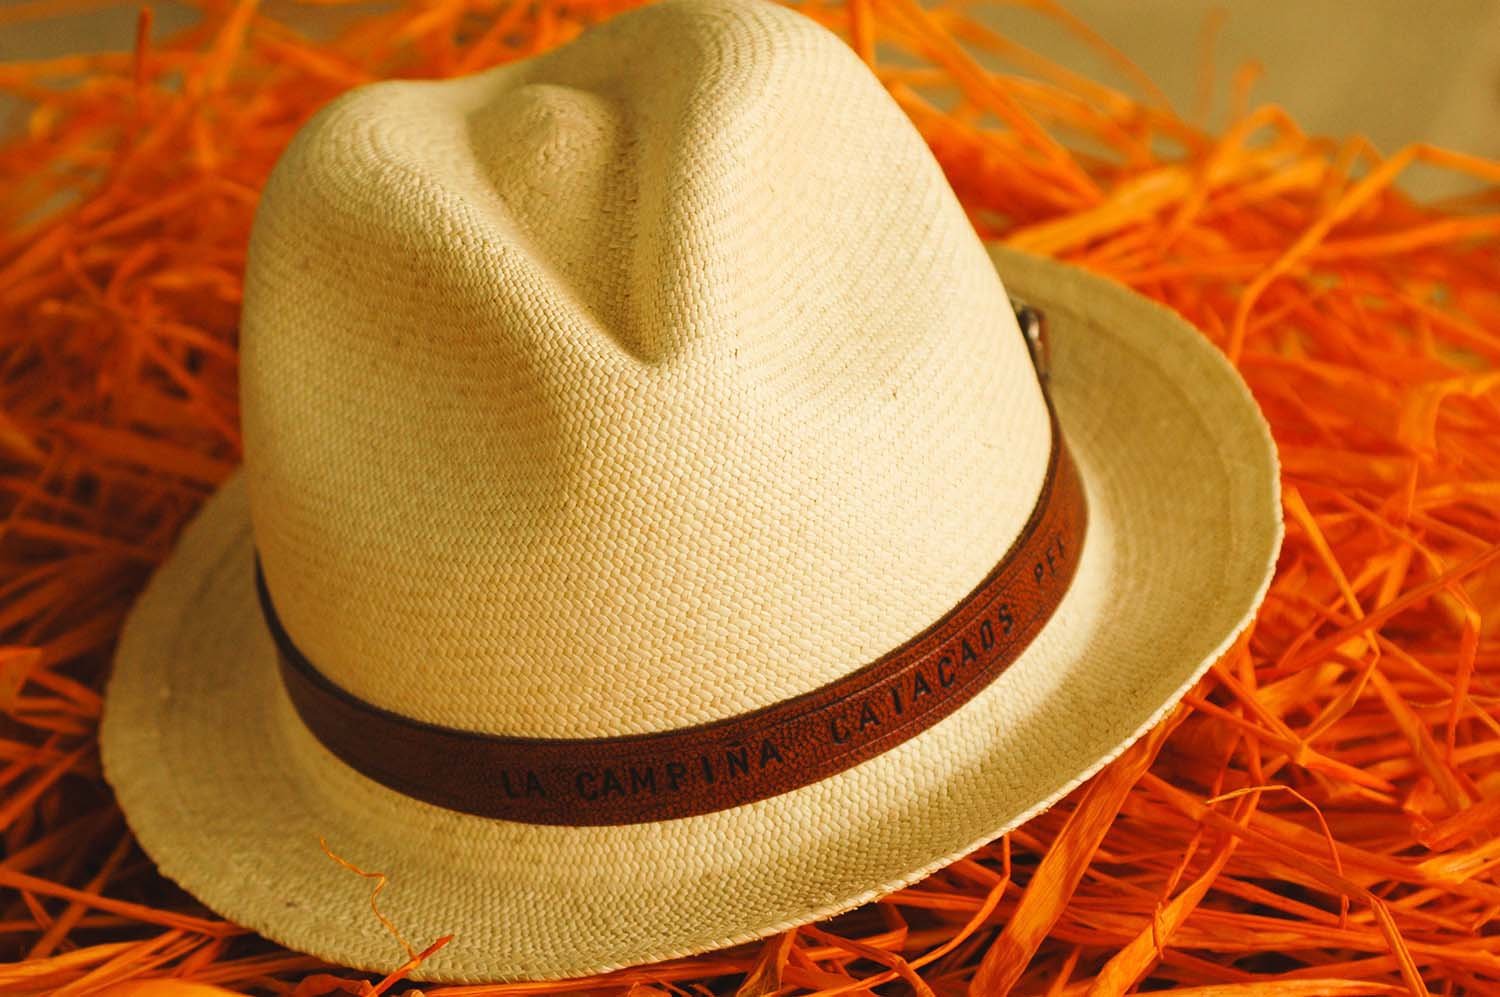 Natural straw hat sitting on a pile of orange straw